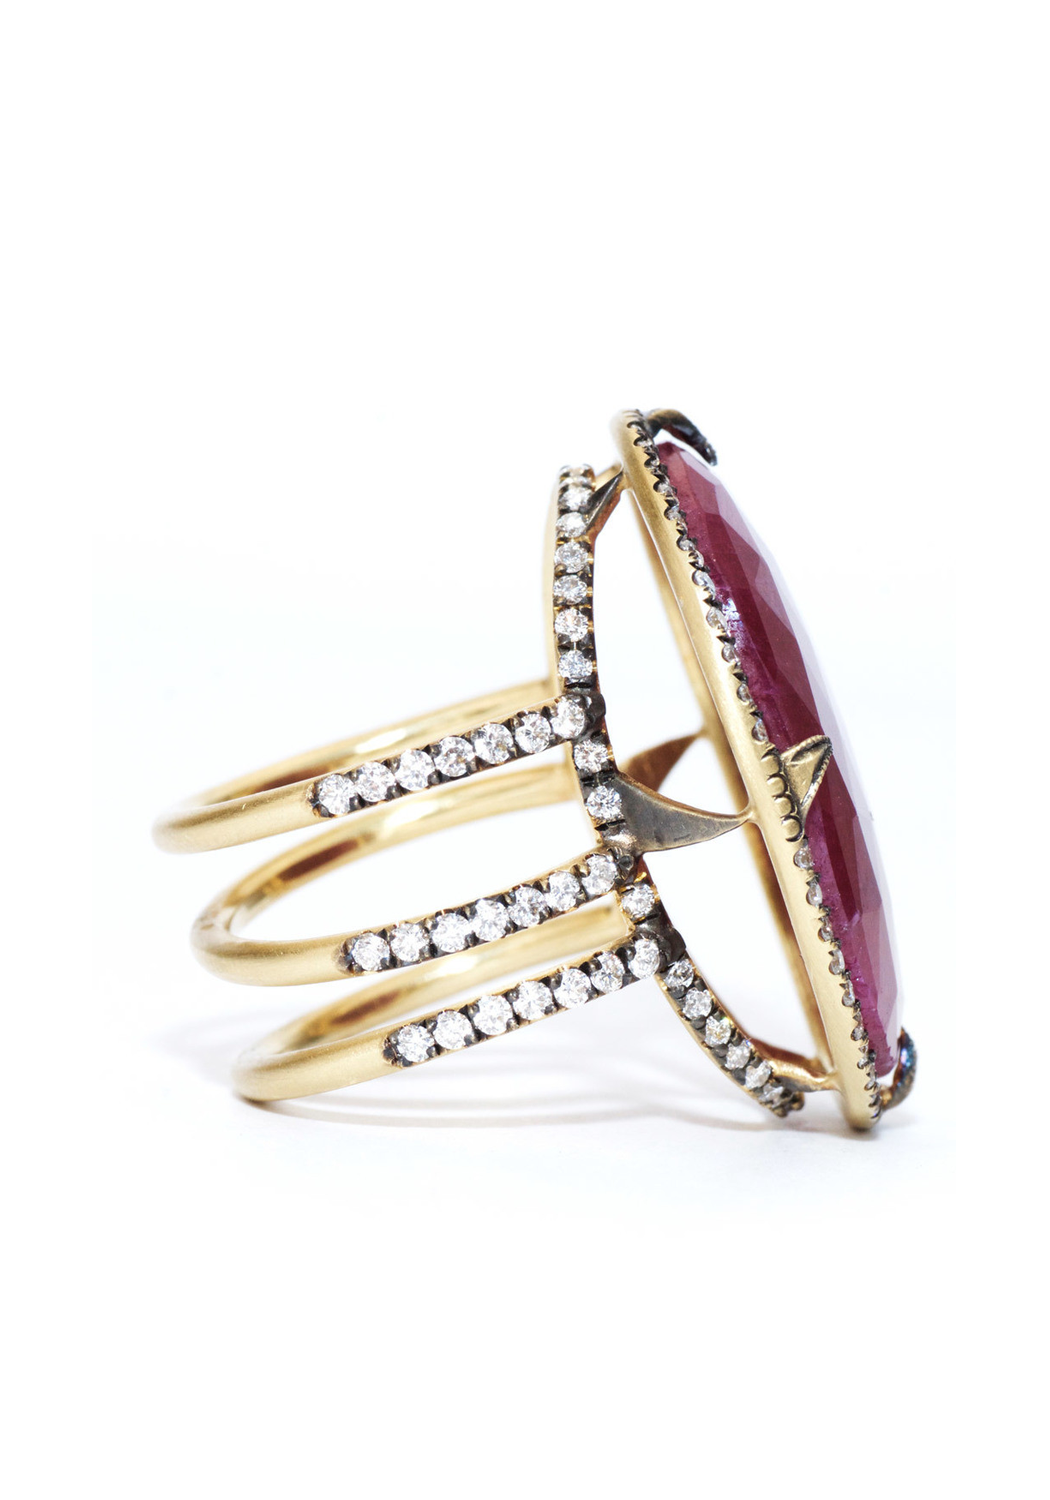 Sylva & Cie 18KYG Diamond & Large Oval Faceted Ruby Ring | OsterJewelers.com